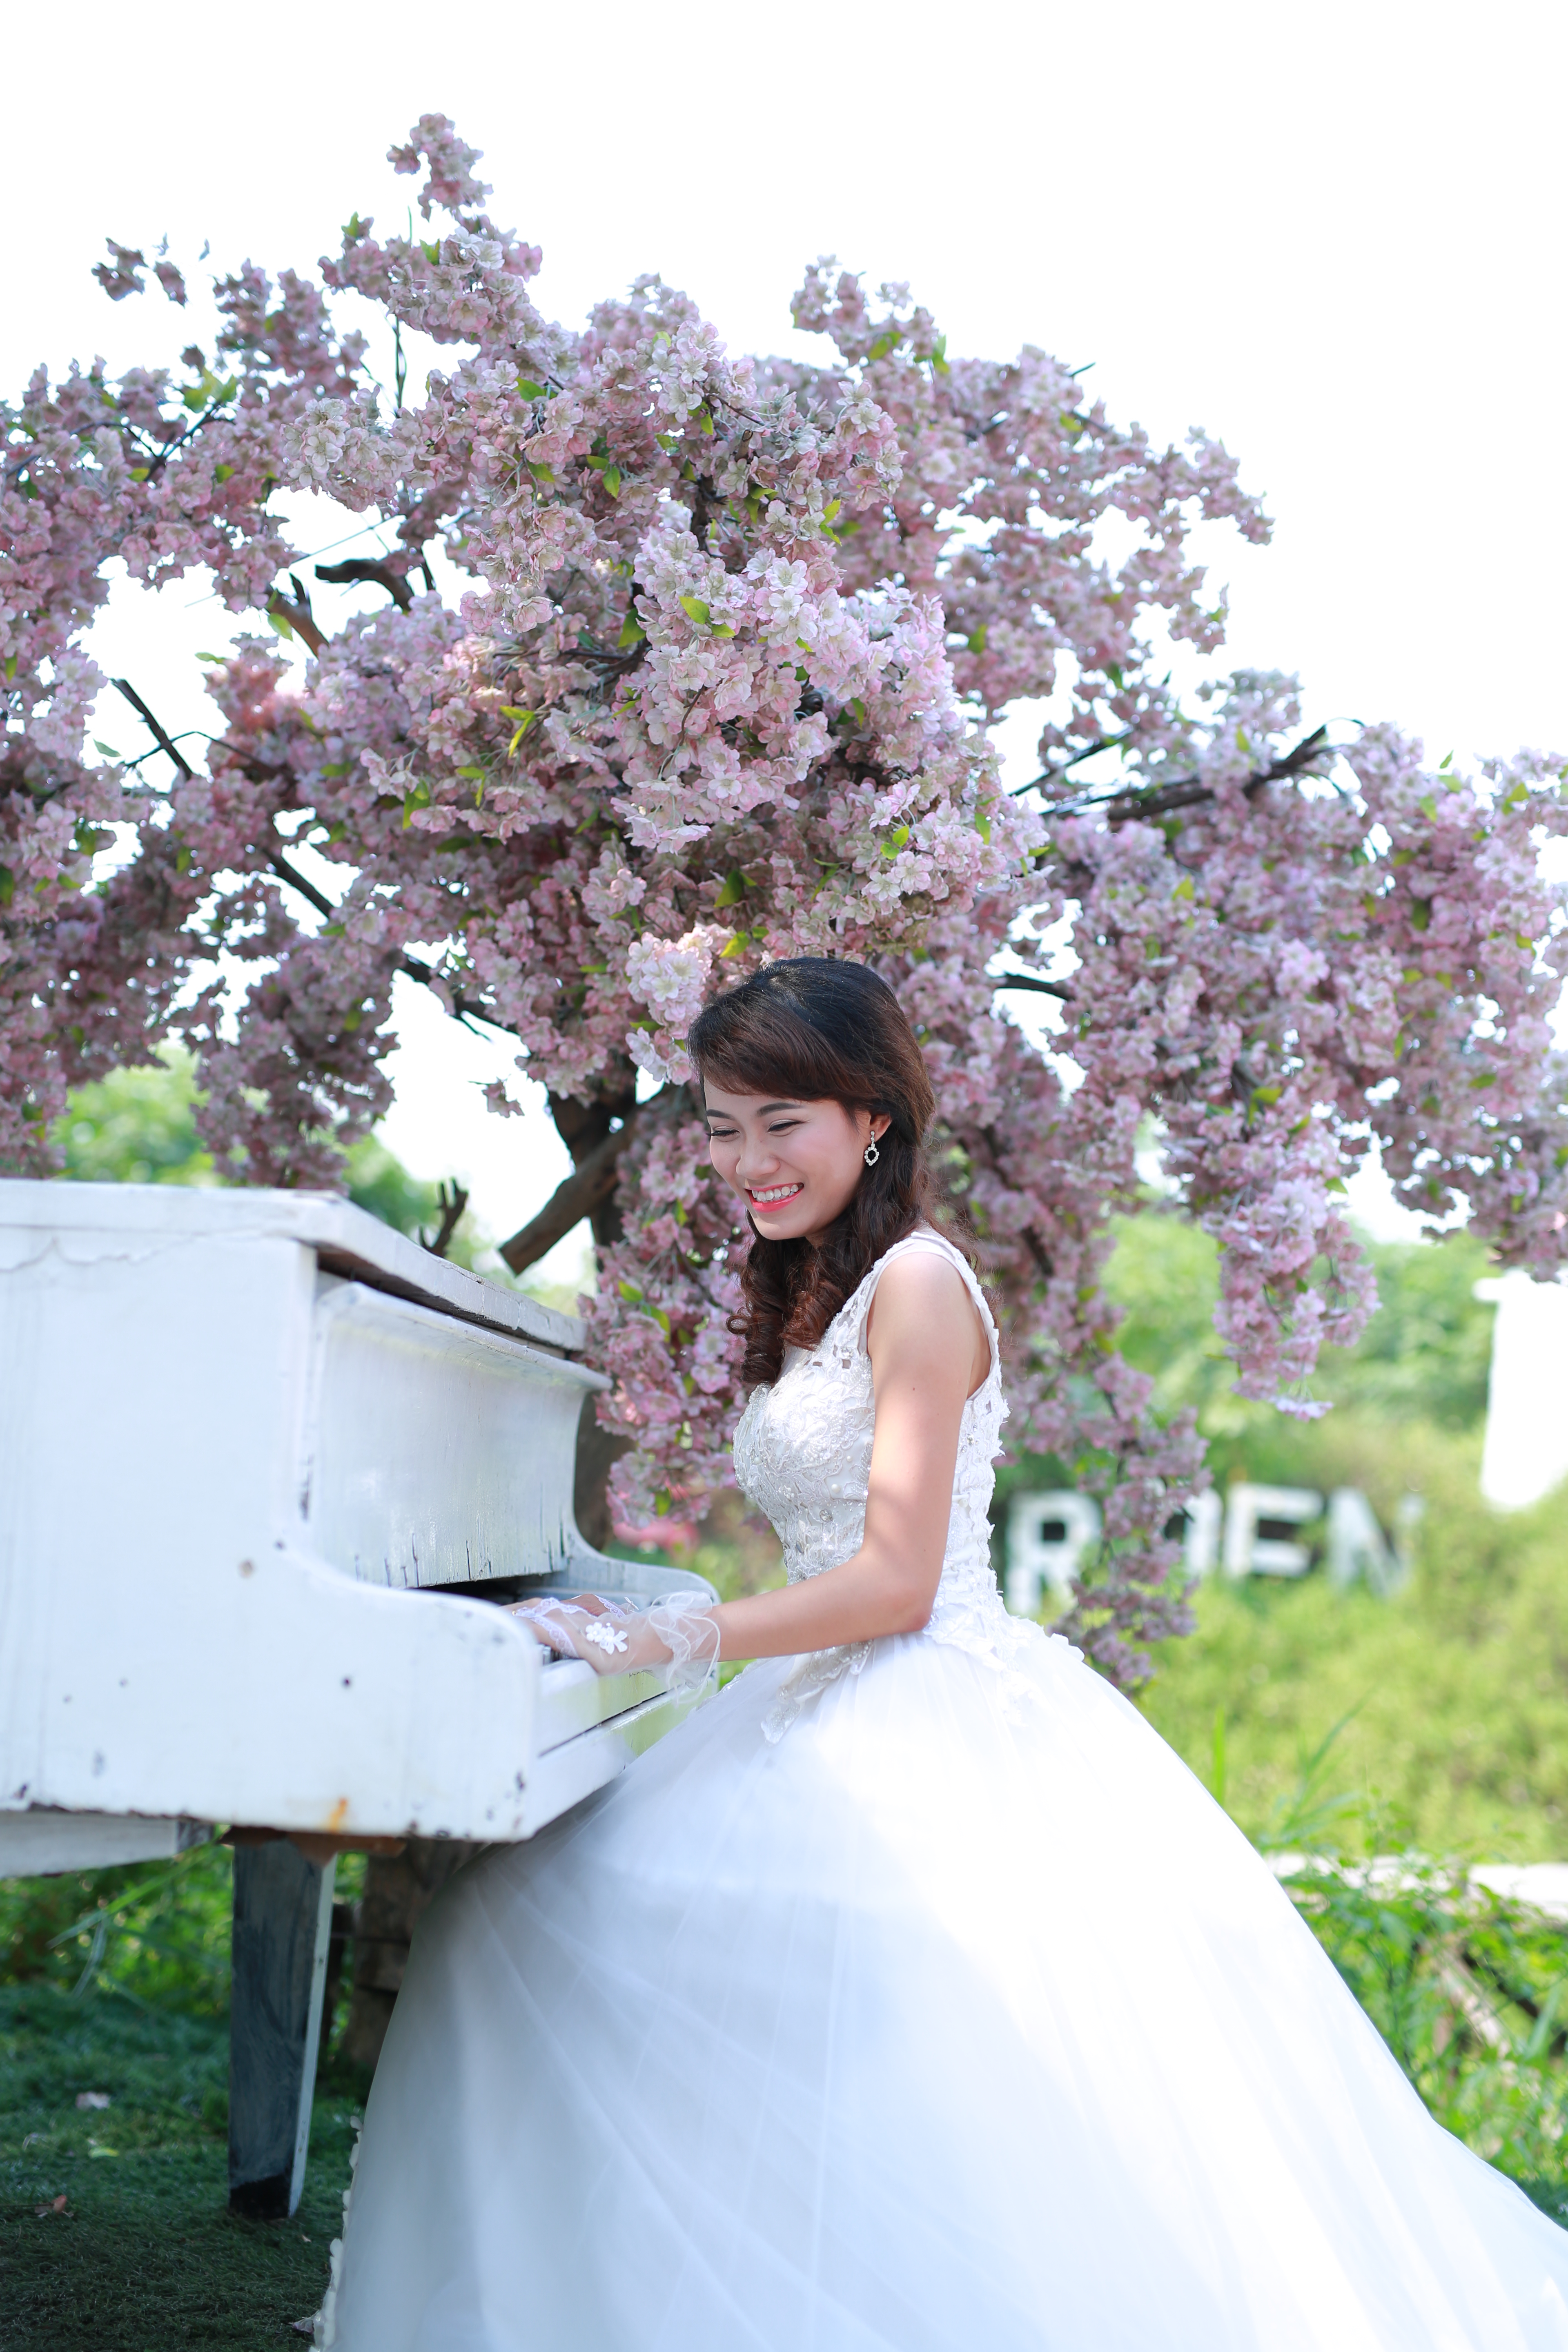 Bride playing the piano, Bride, Happy, Love, Marriage, HQ Photo